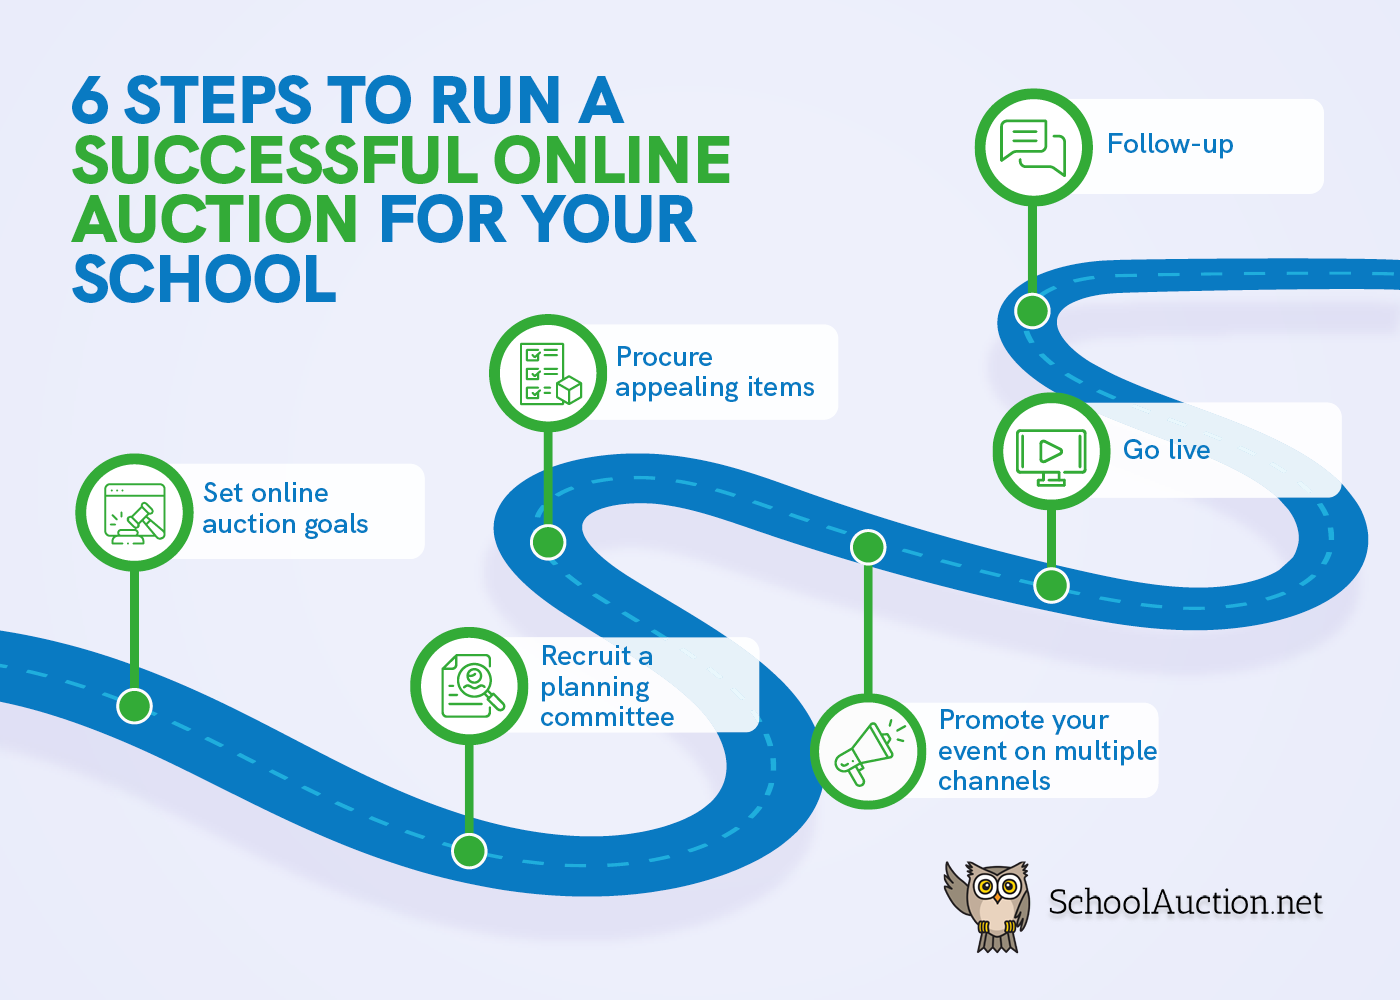 Shows the steps to plan an online auction for your school as explained in the text below.